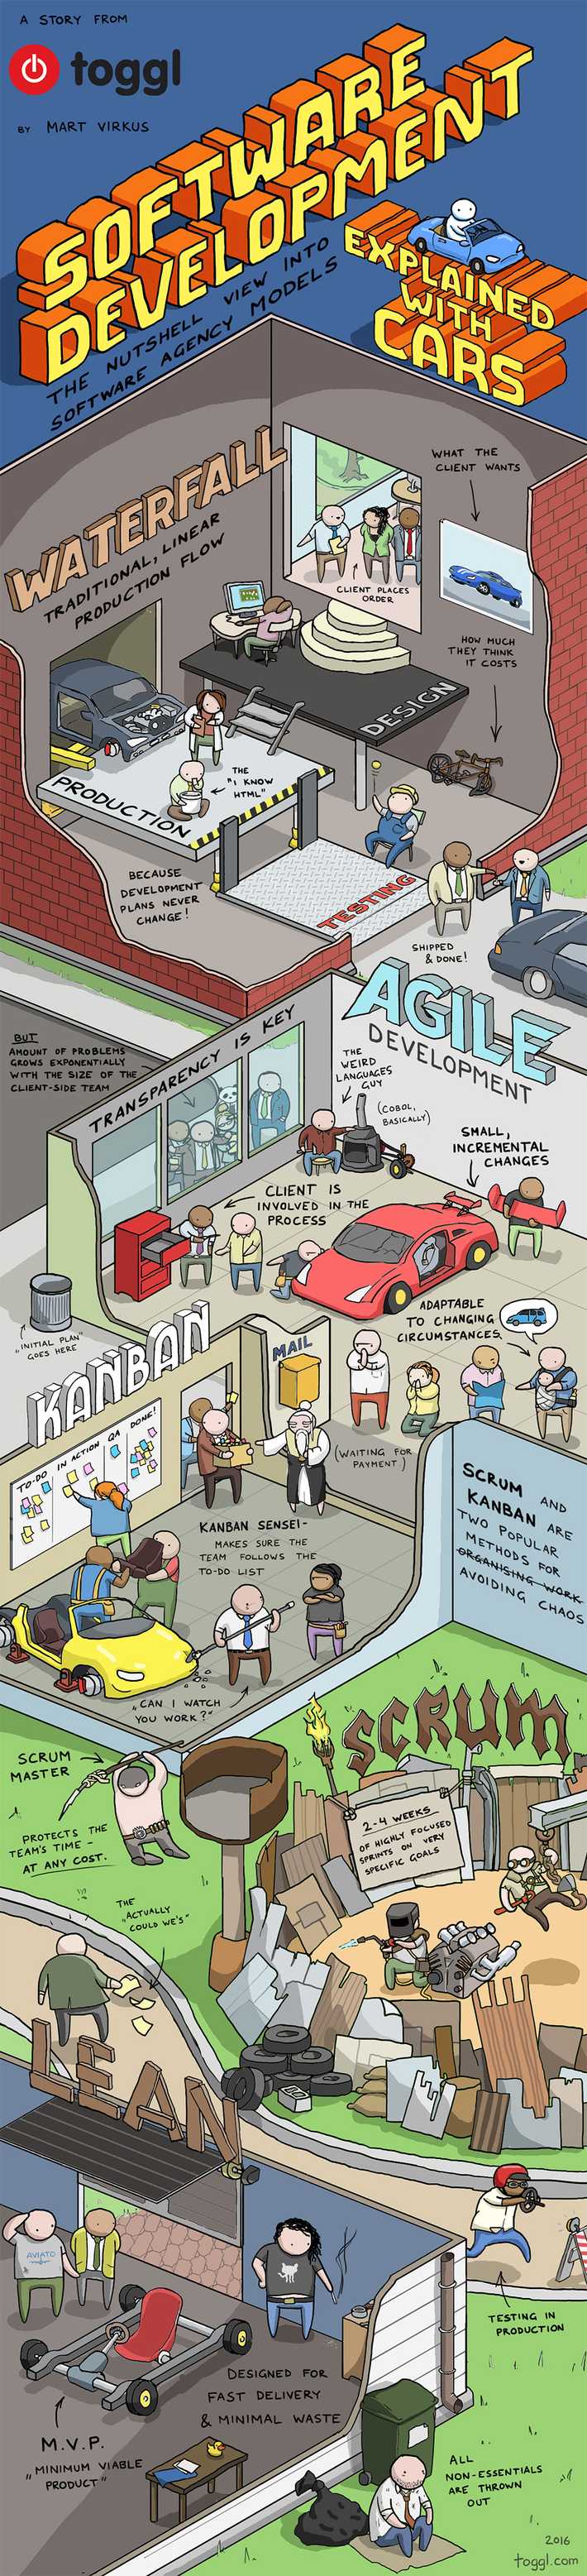 Software development methods explained with cars